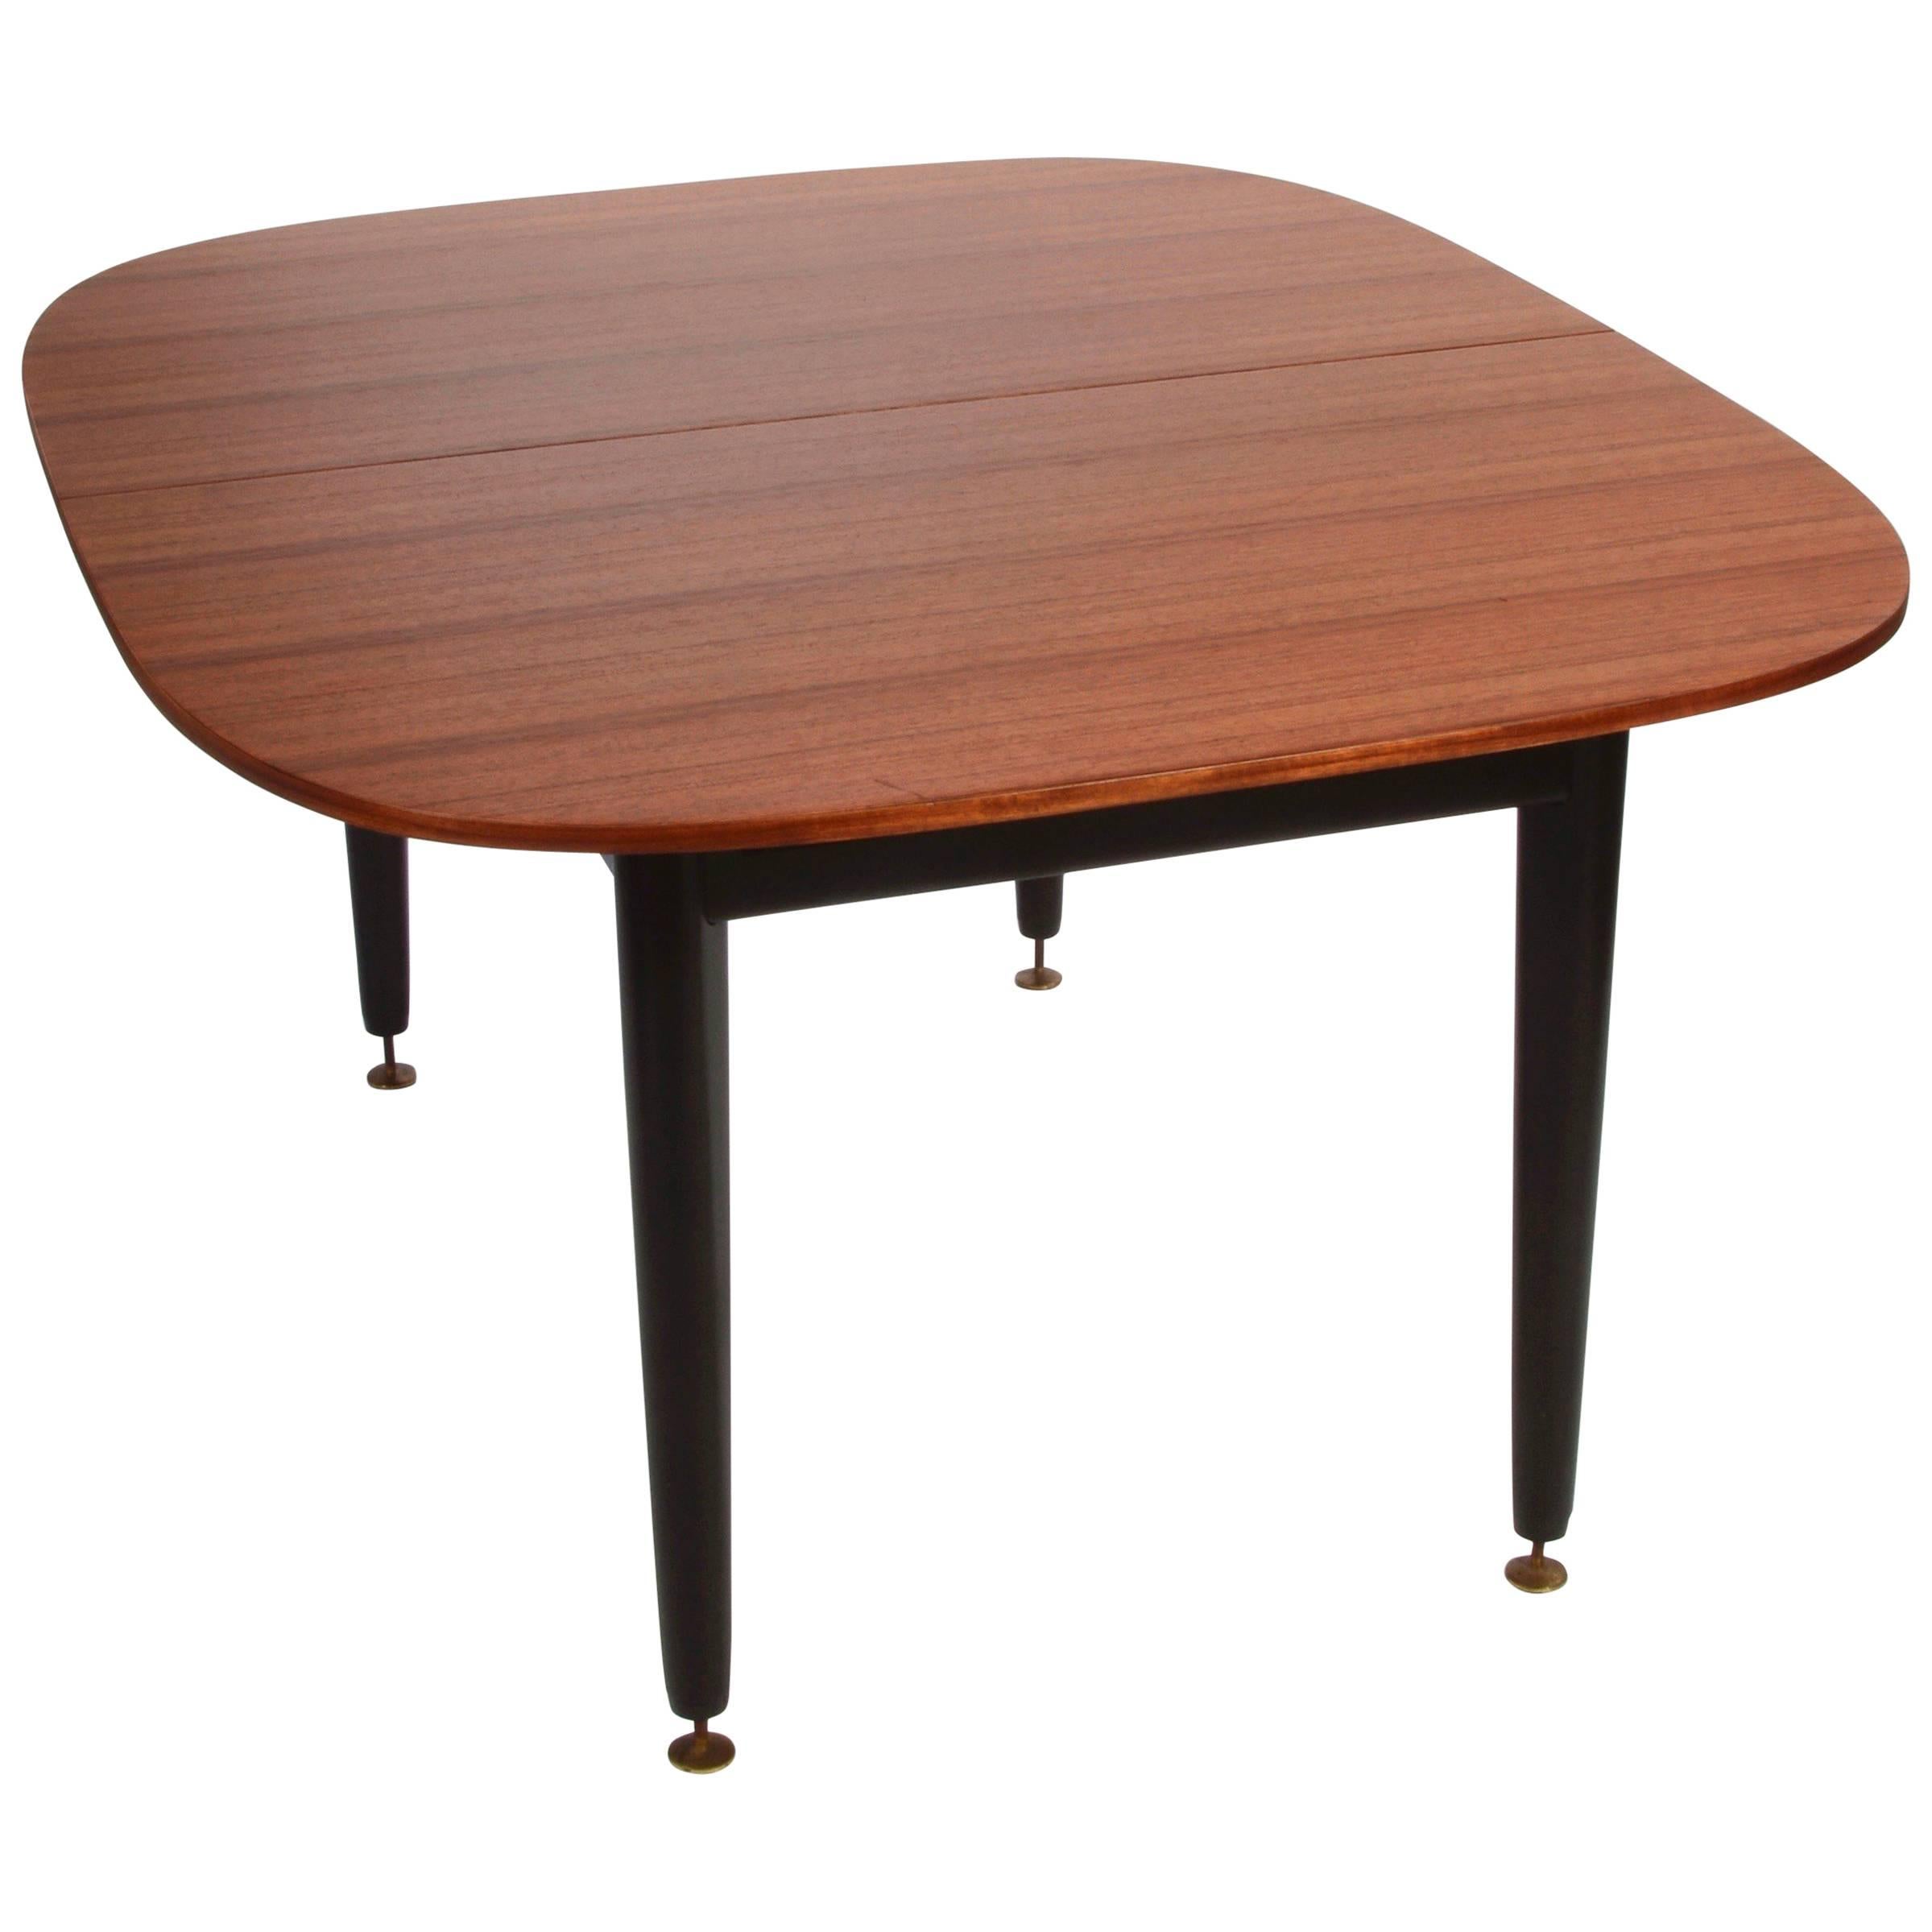 What wood is G Plan furniture made from?